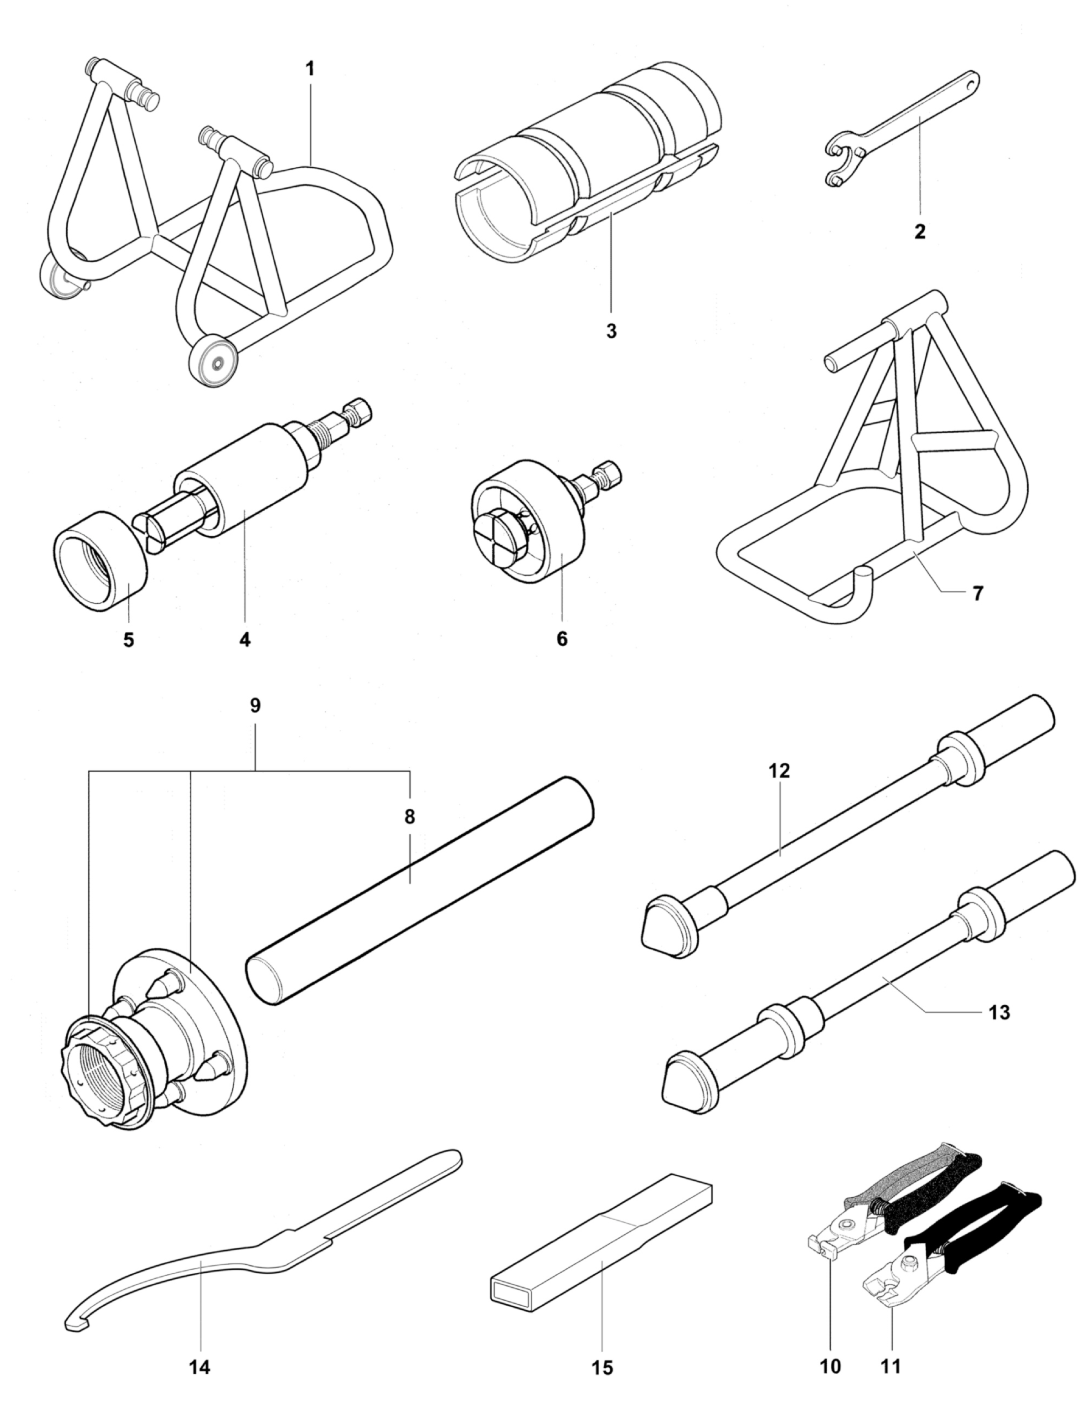 Service Tools Frame


